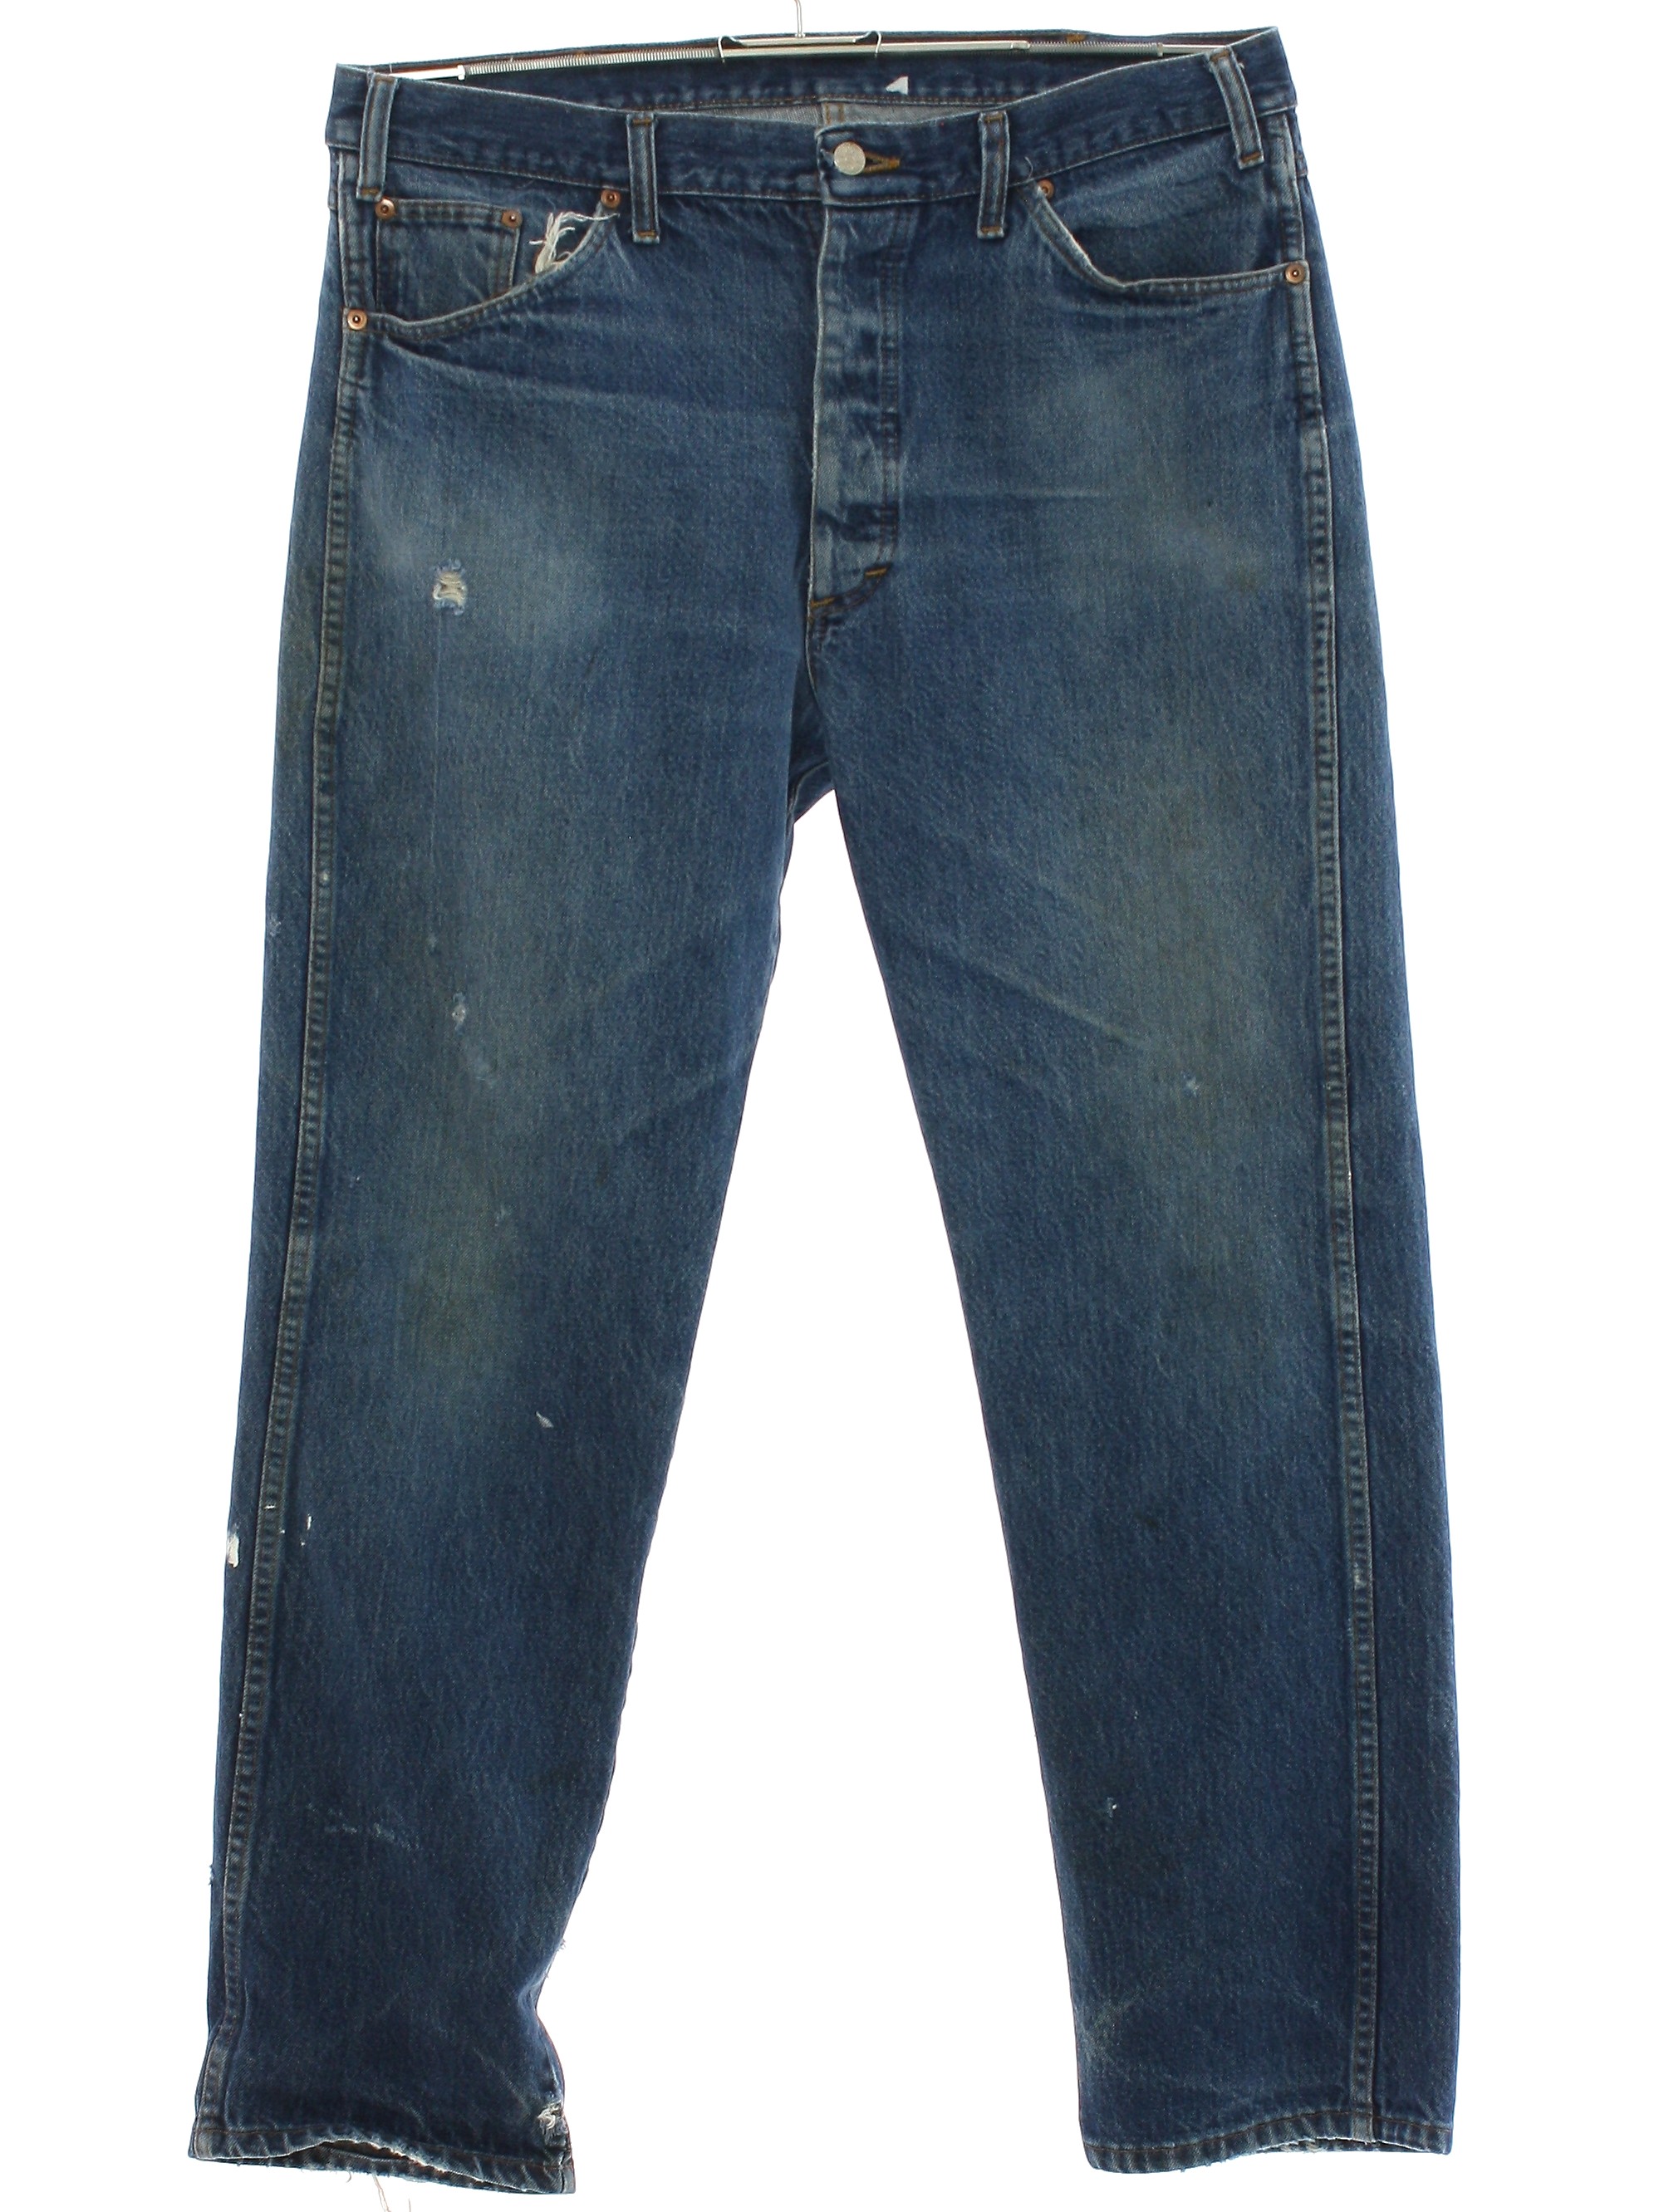 80's Vintage Pants: 80s -Off Duty- Mens worn and distressed blue cotton ...